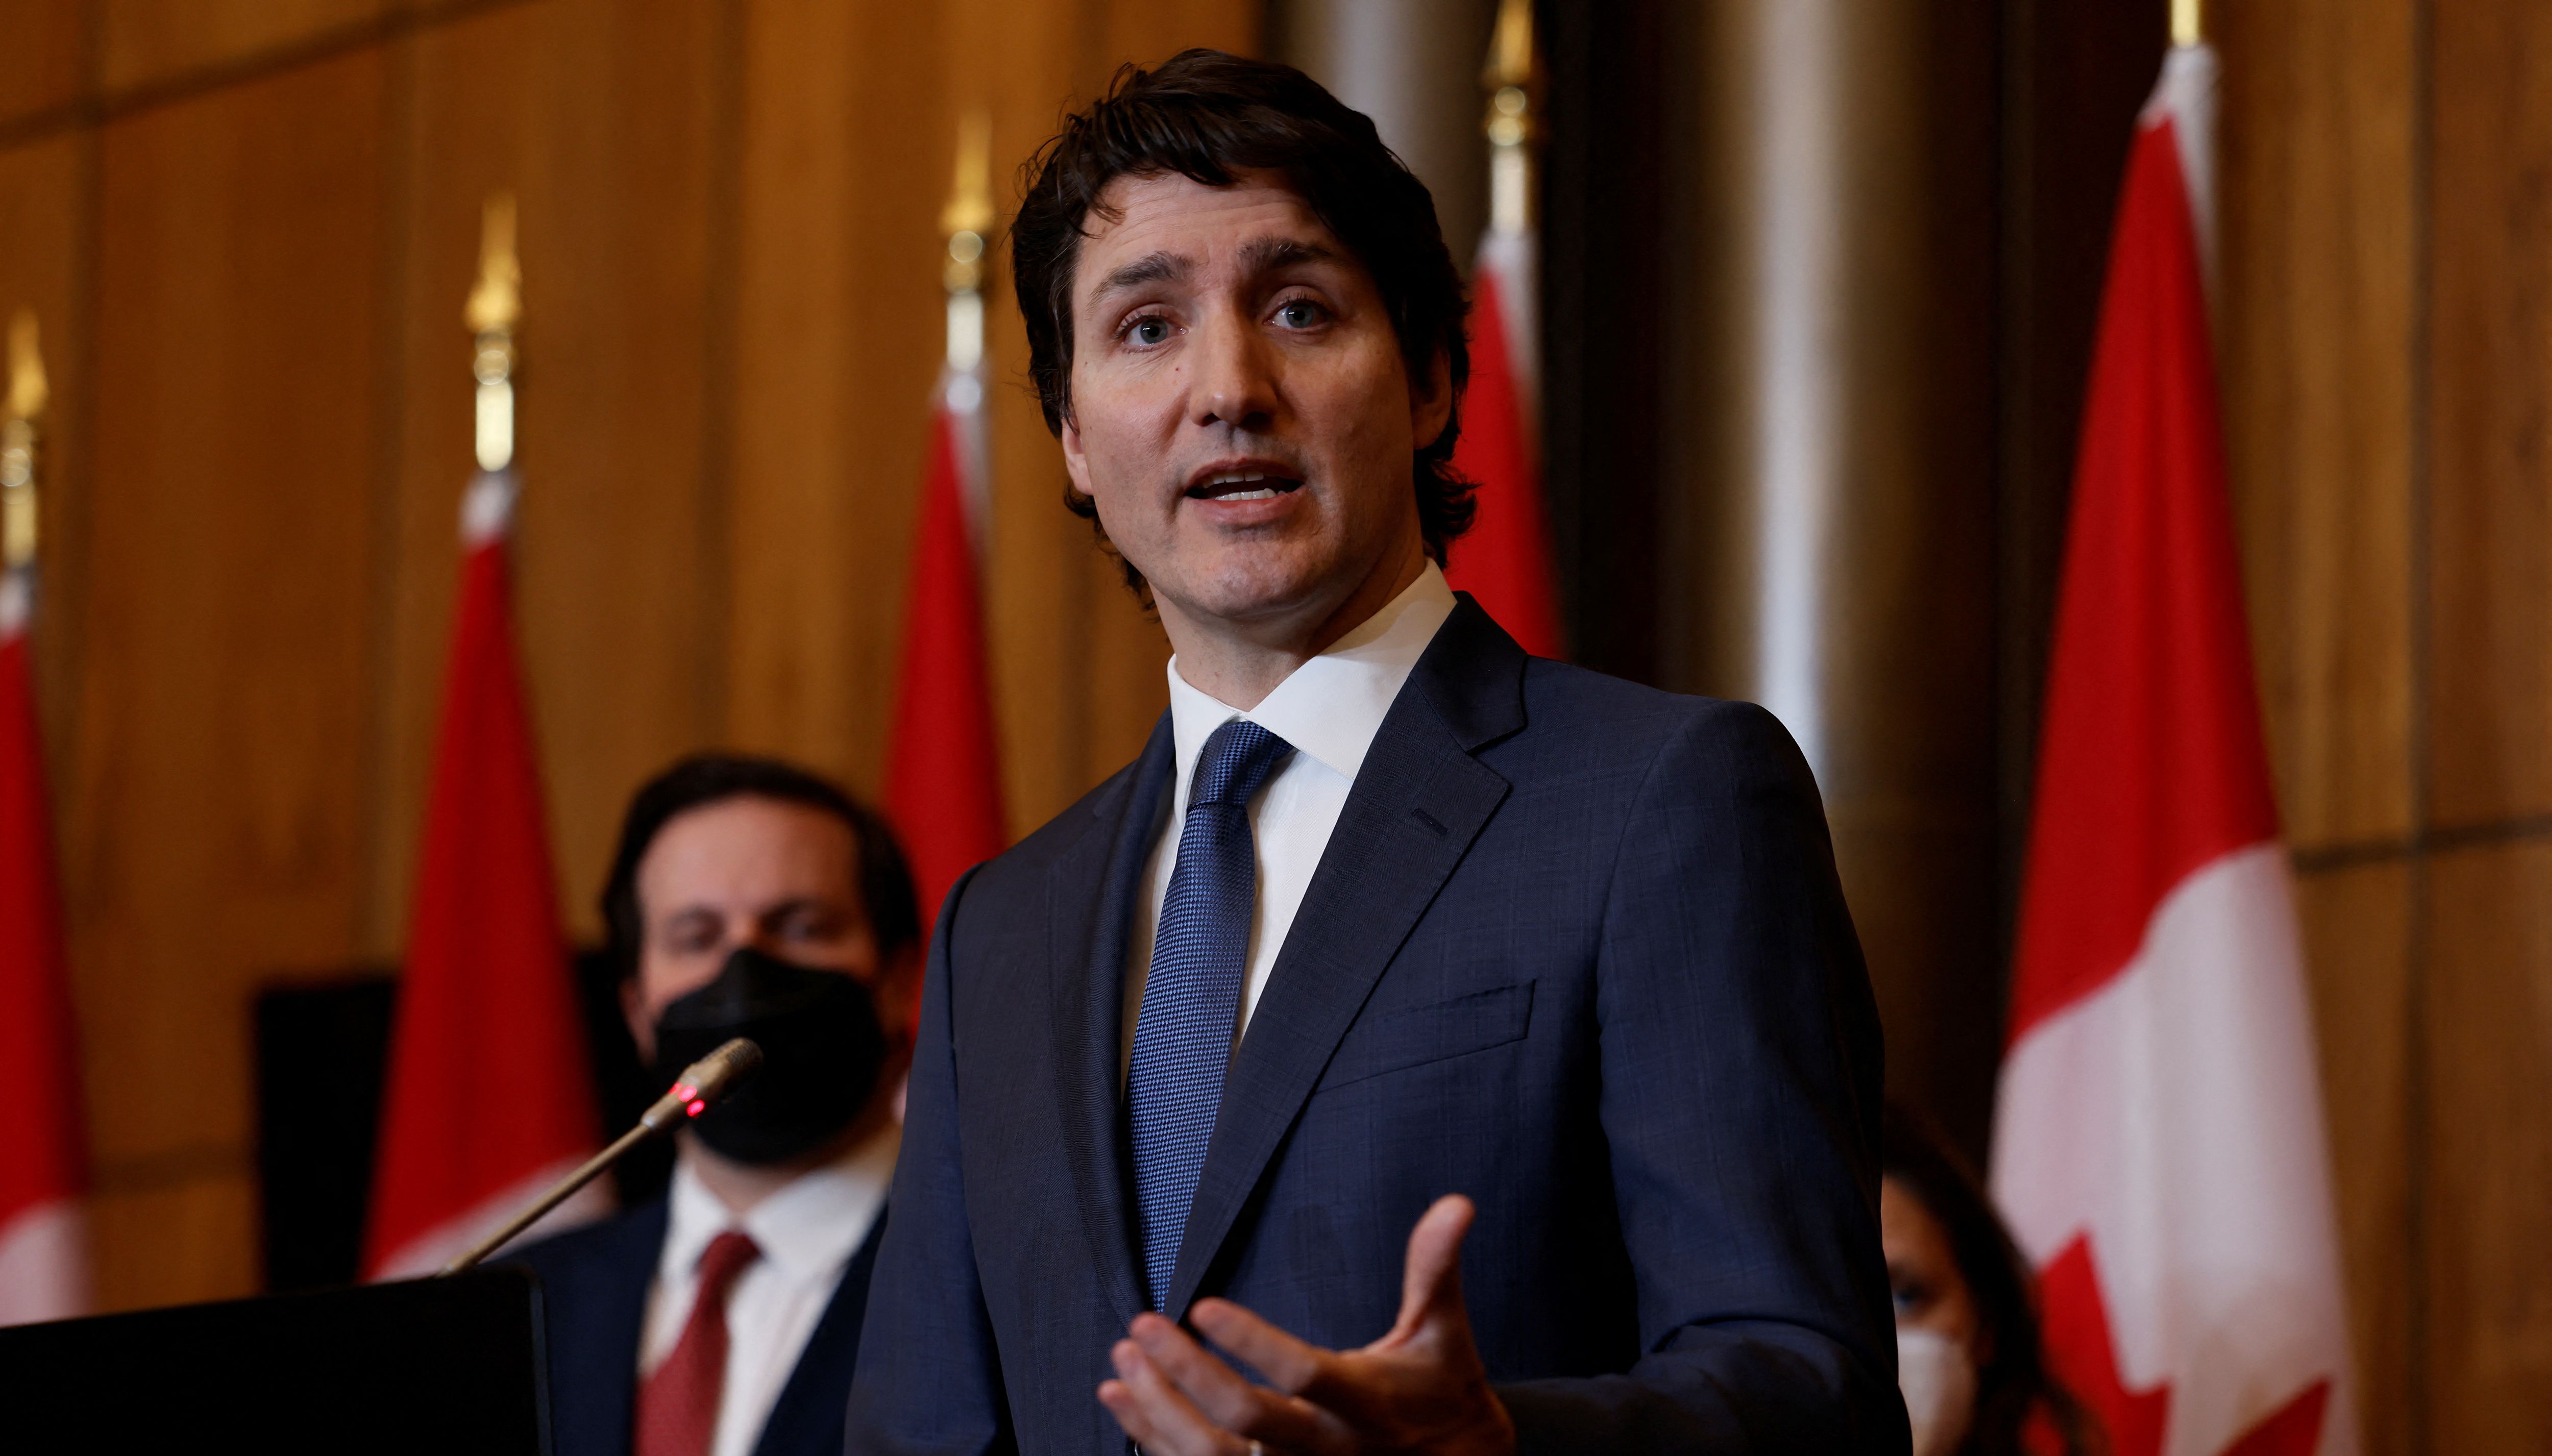 Canada's Prime Minister Justin Trudeau takes part in a news conference after police ended three weeks of occupation of the capital by protesters seeking to end Covid vaccine mandates in Ottawa, Canada